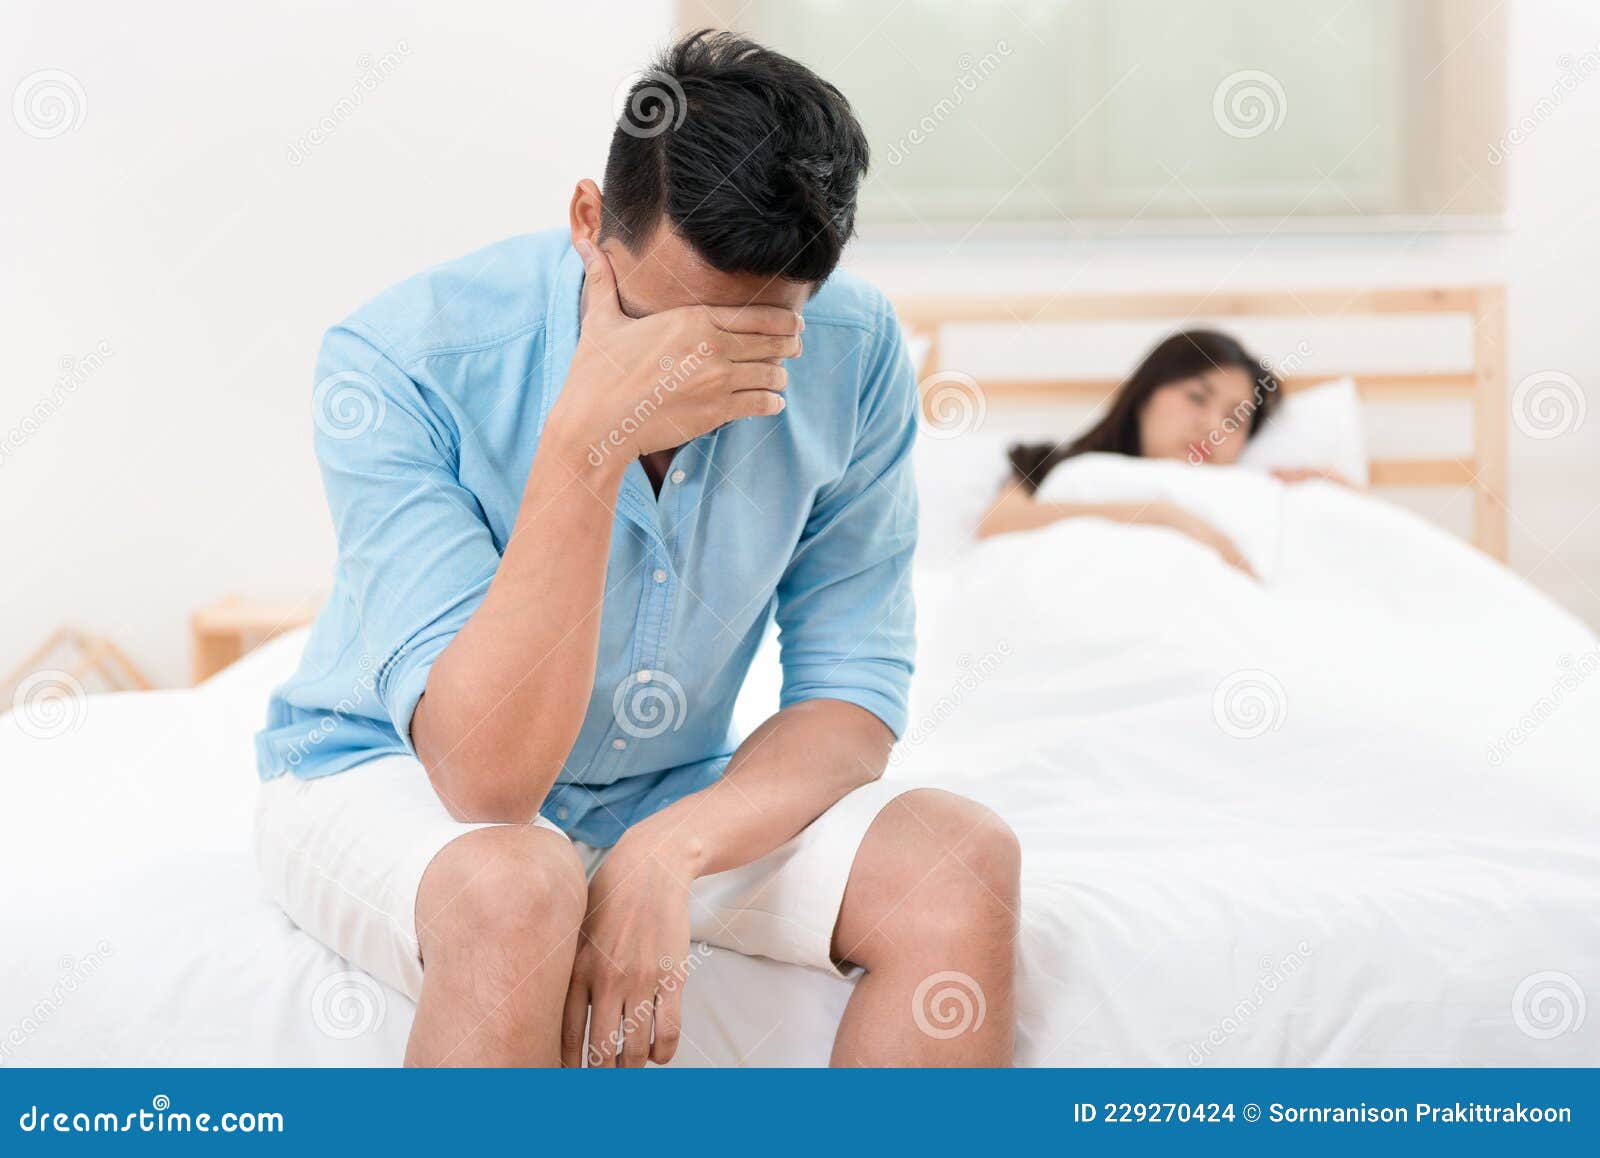 Husband Unhappy and Disappointed Stock Photo